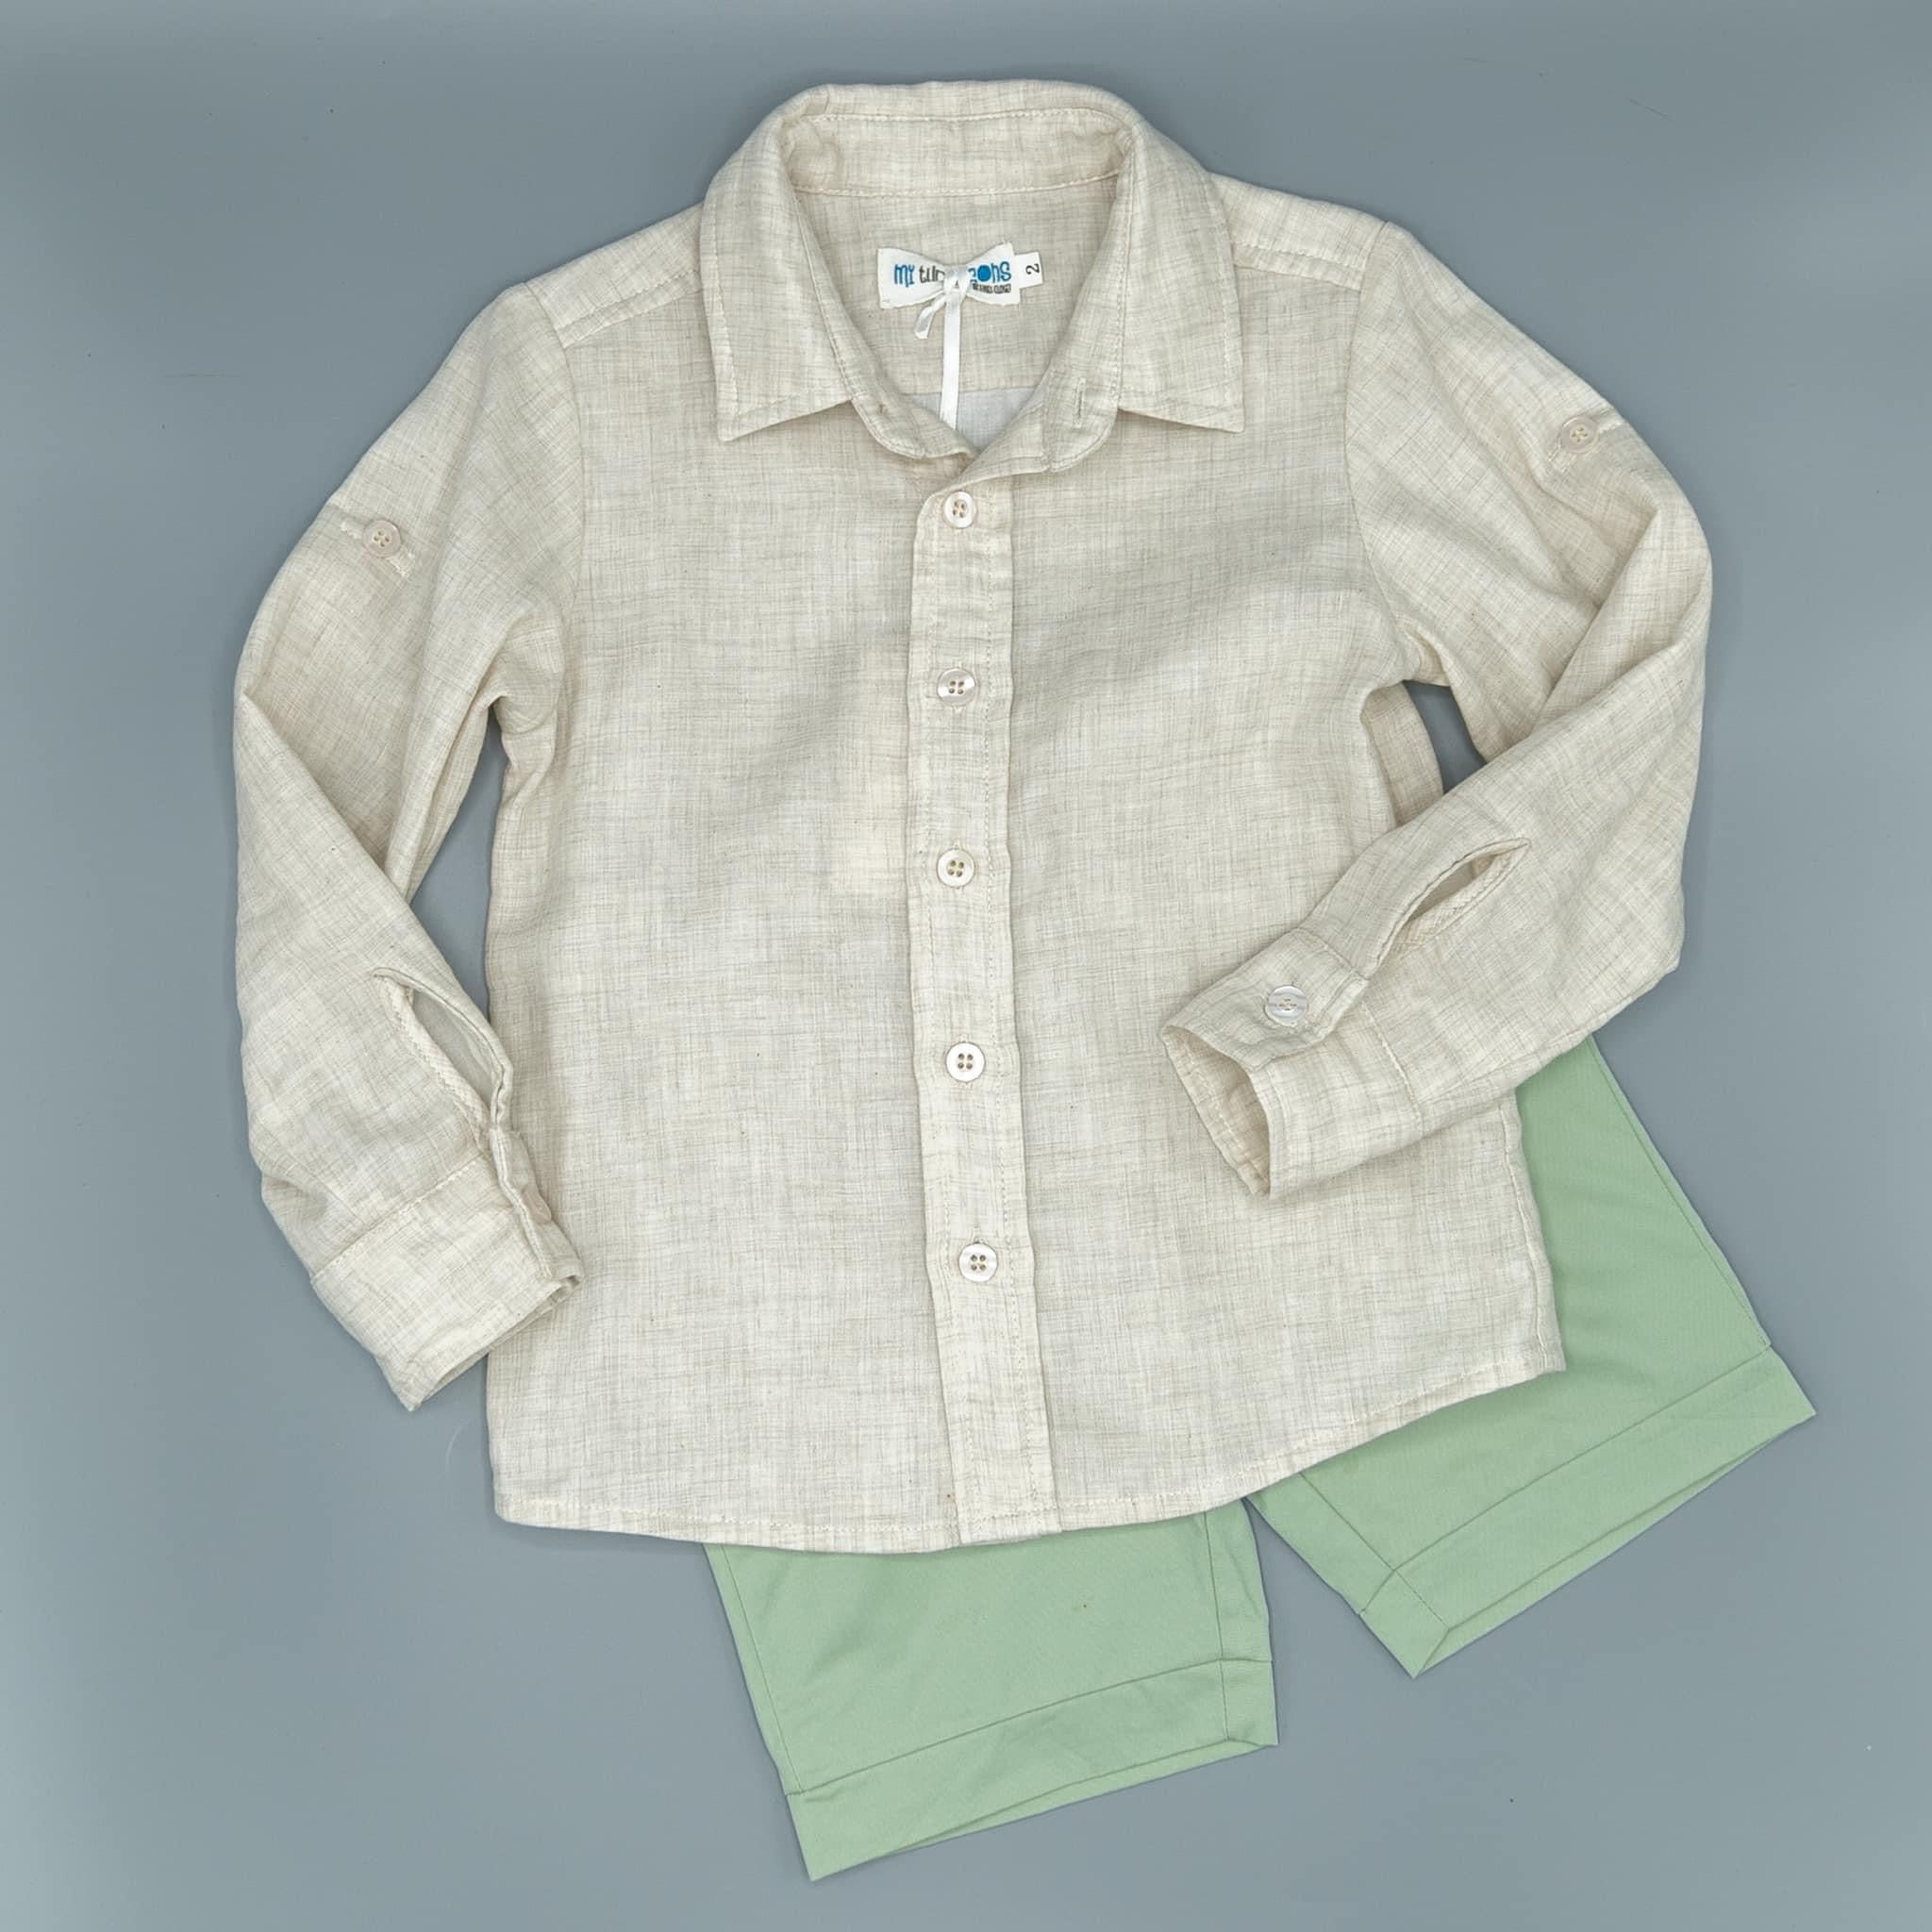 Made to Match Wheat Collared Boys Shirt - Evie's Closet Clothing